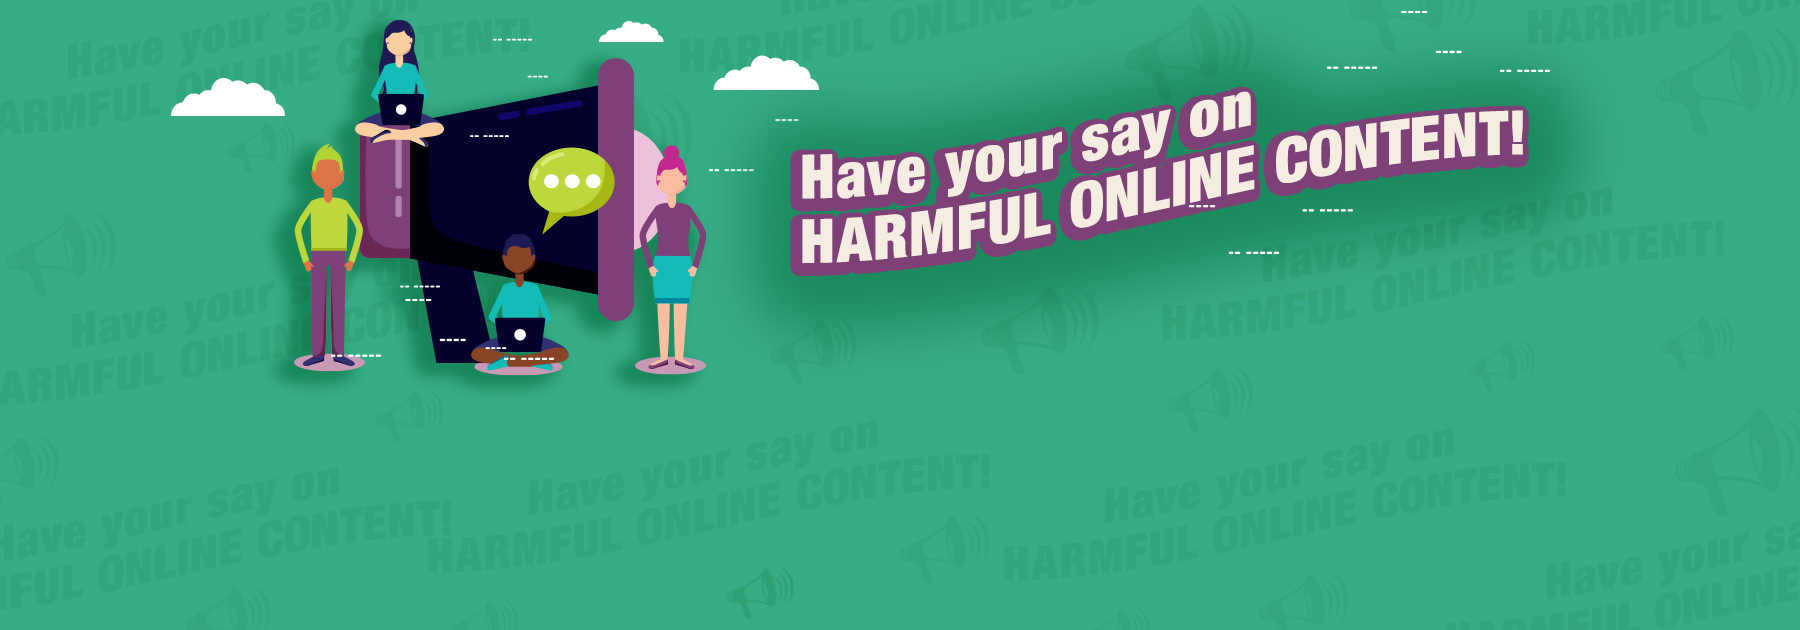 Have your say on harmful online content!